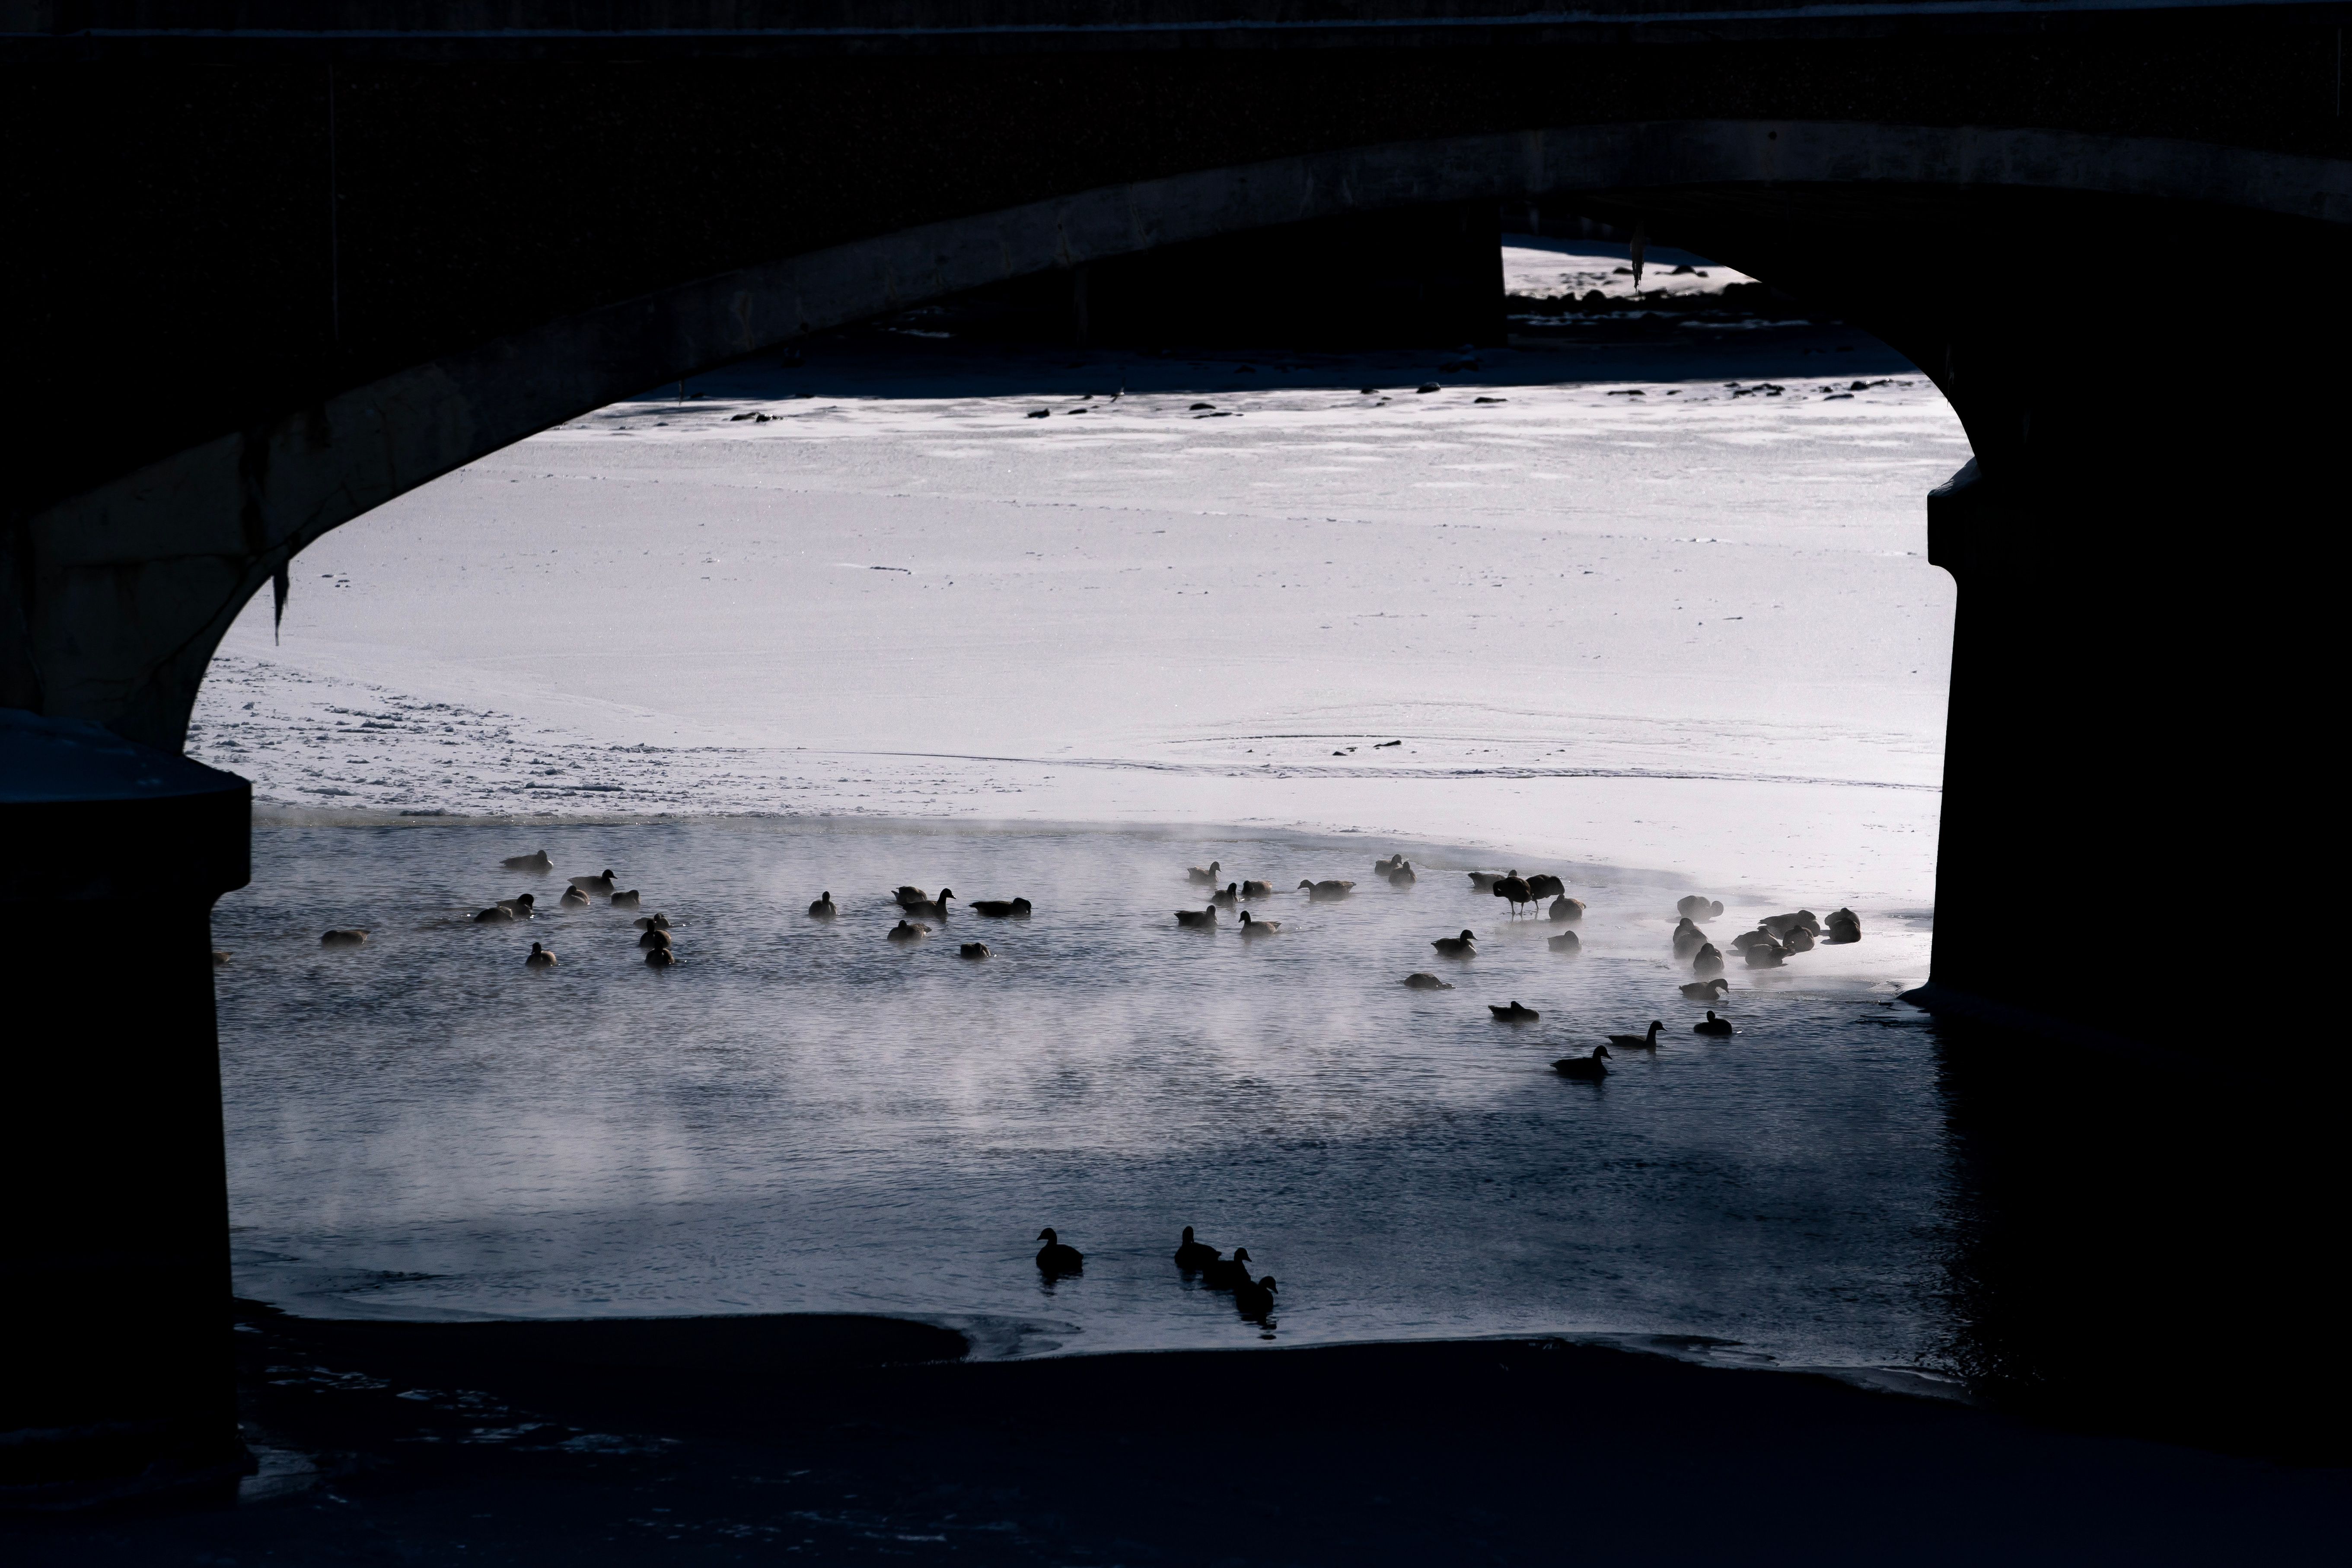 Ducks swim near a frozen portion of the Des Moines River during a winter storm ahead of the Iowa caucus in Des Moines, Iowa, US, on Sunday, Jan. 14, 2024. Iowans on Monday will cast the first votes in the 2024 presidential nominating process during a caucus that's likely to show depressed turnout because of historically frigid weather. 